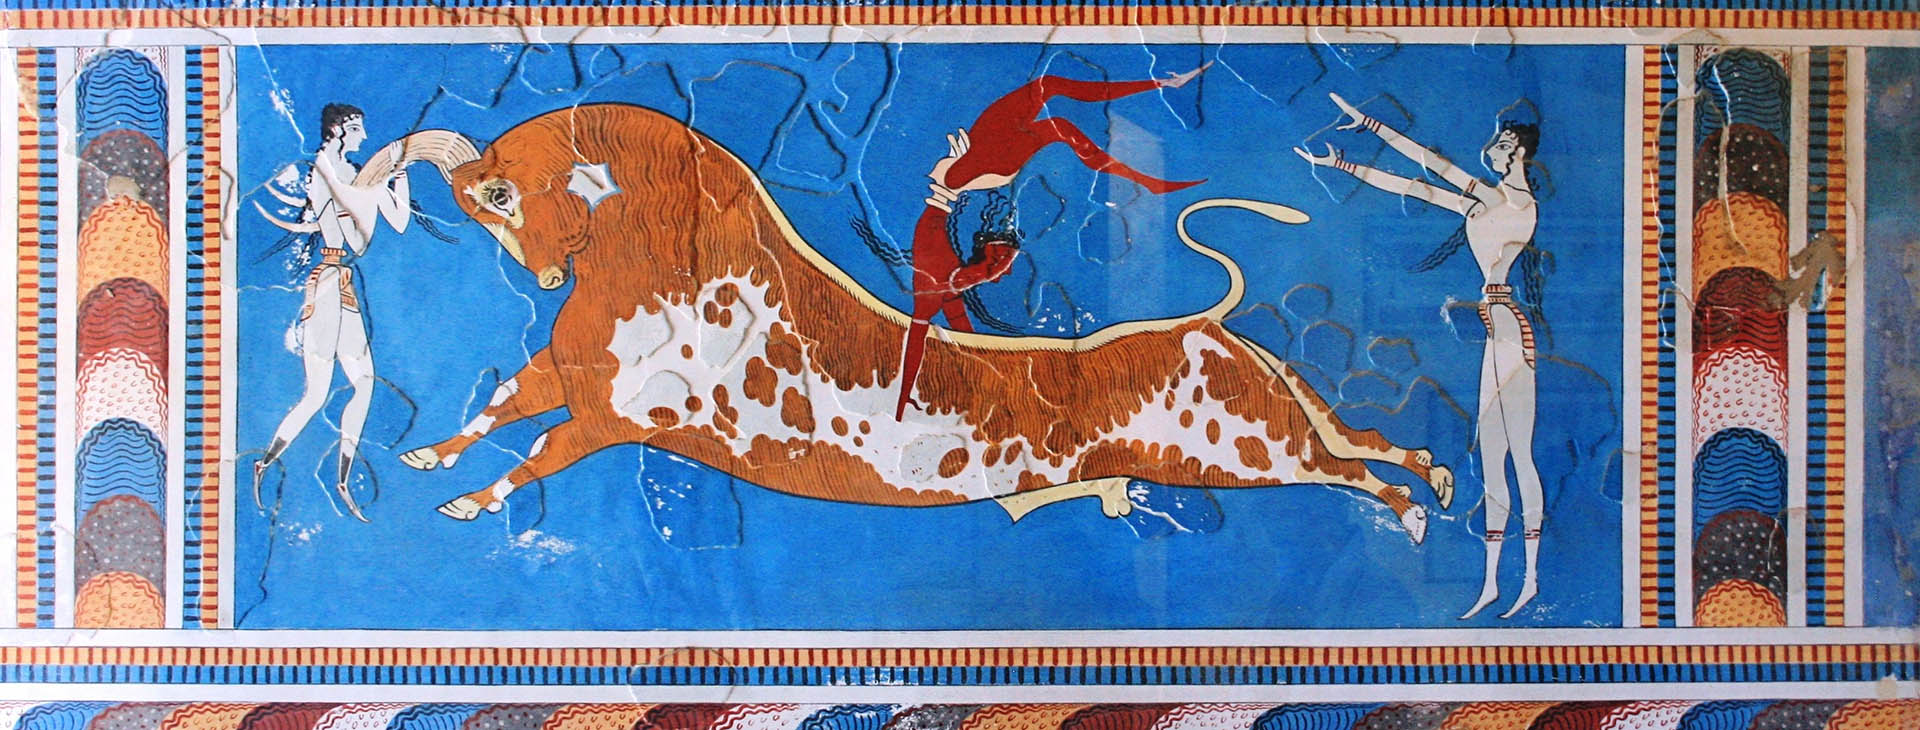 Bull-leaping, fresco at the Minoan palace of Knossos, Heraklion